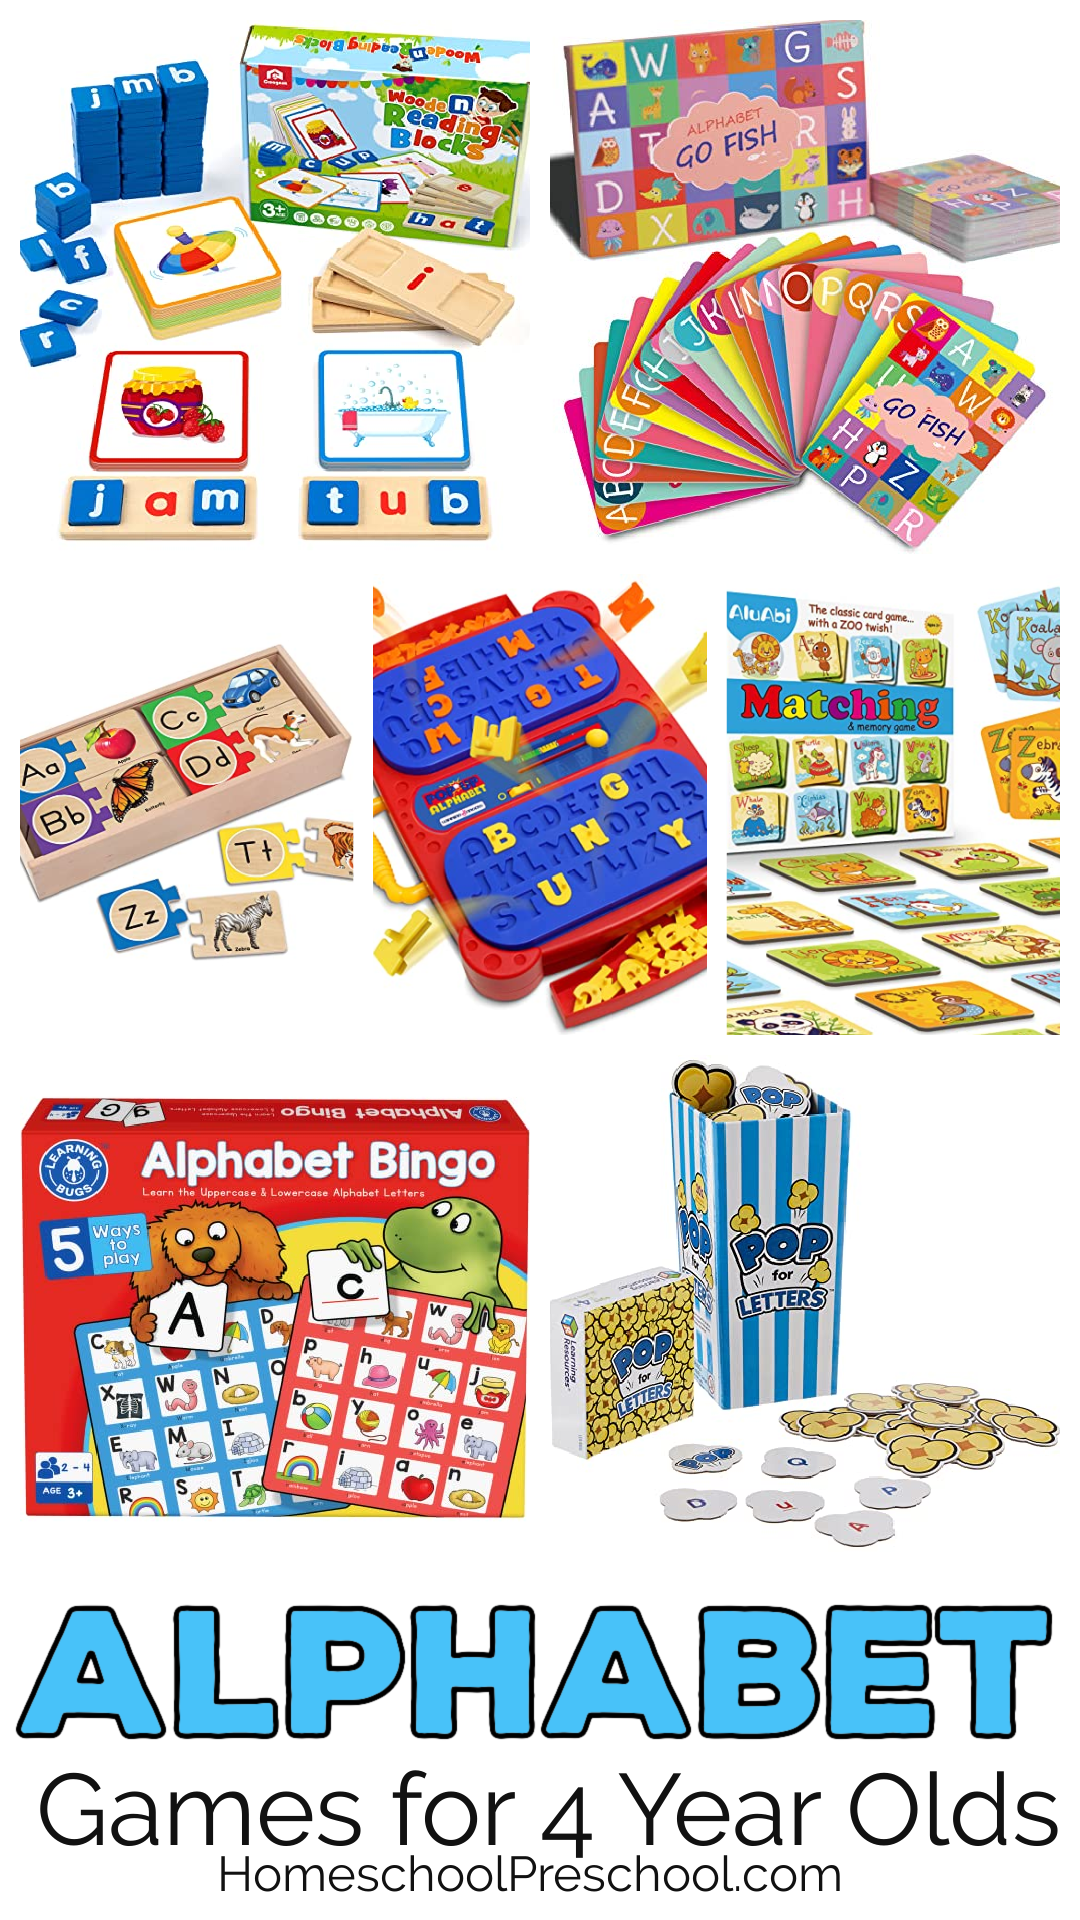 Alphabet-Games-for-4-Year-Olds-2 Alphabet Games for 4 Year Olds